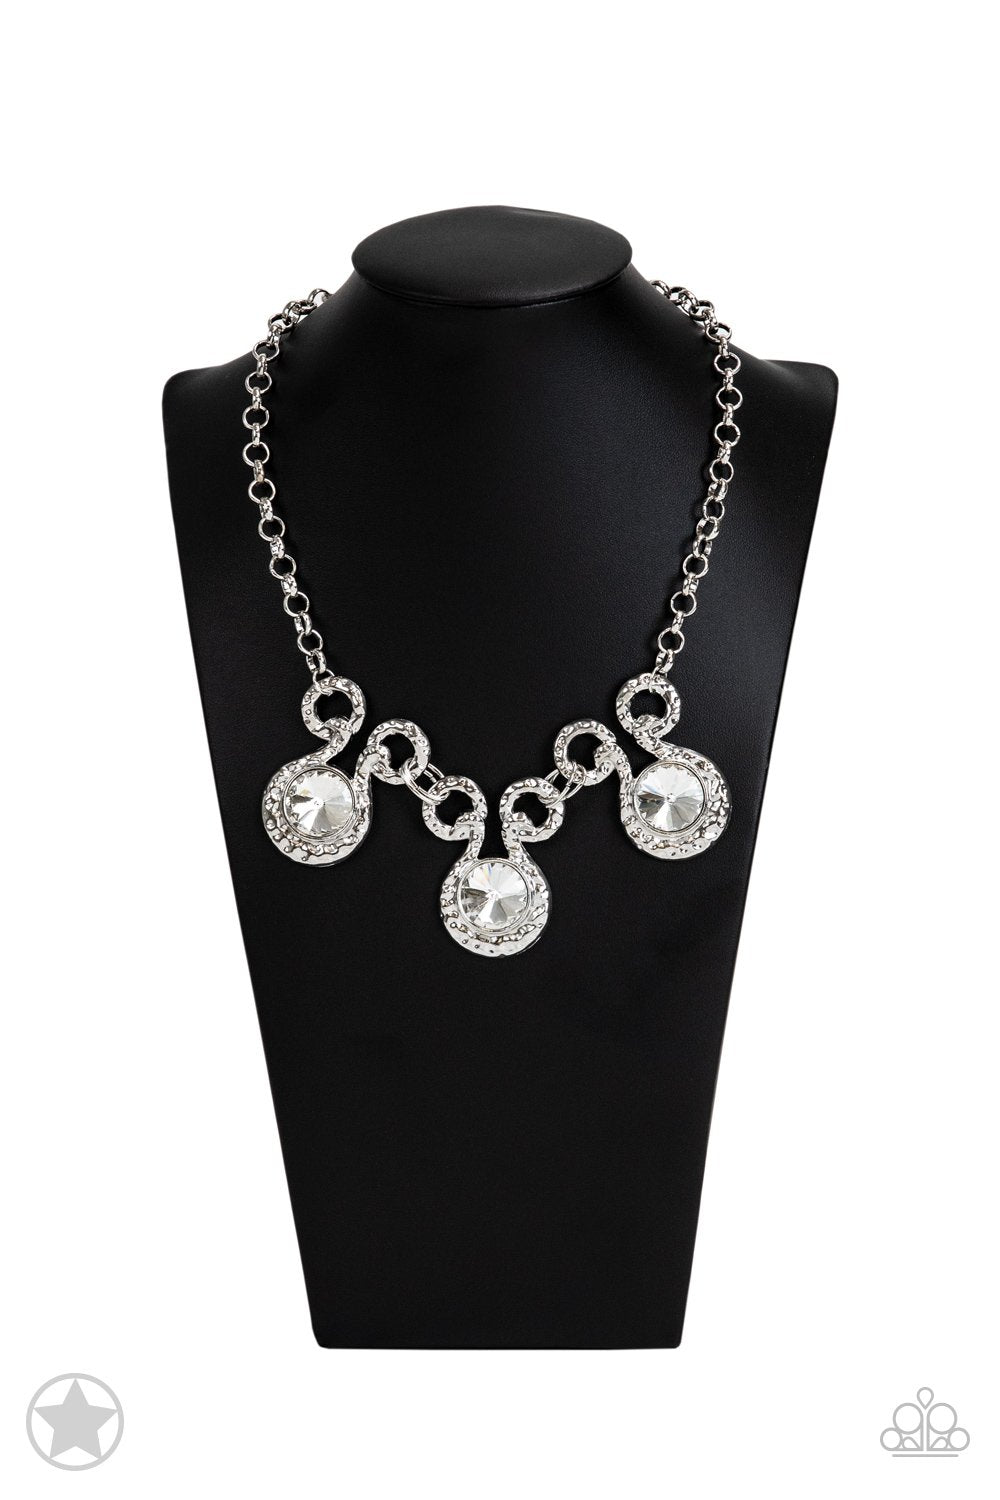 Hypnotized - Silver and White Rhinestone Necklace and matching Earrings - Paparazzi Accessories- on bust -CarasShop.com - $5 Jewelry by Cara Jewels